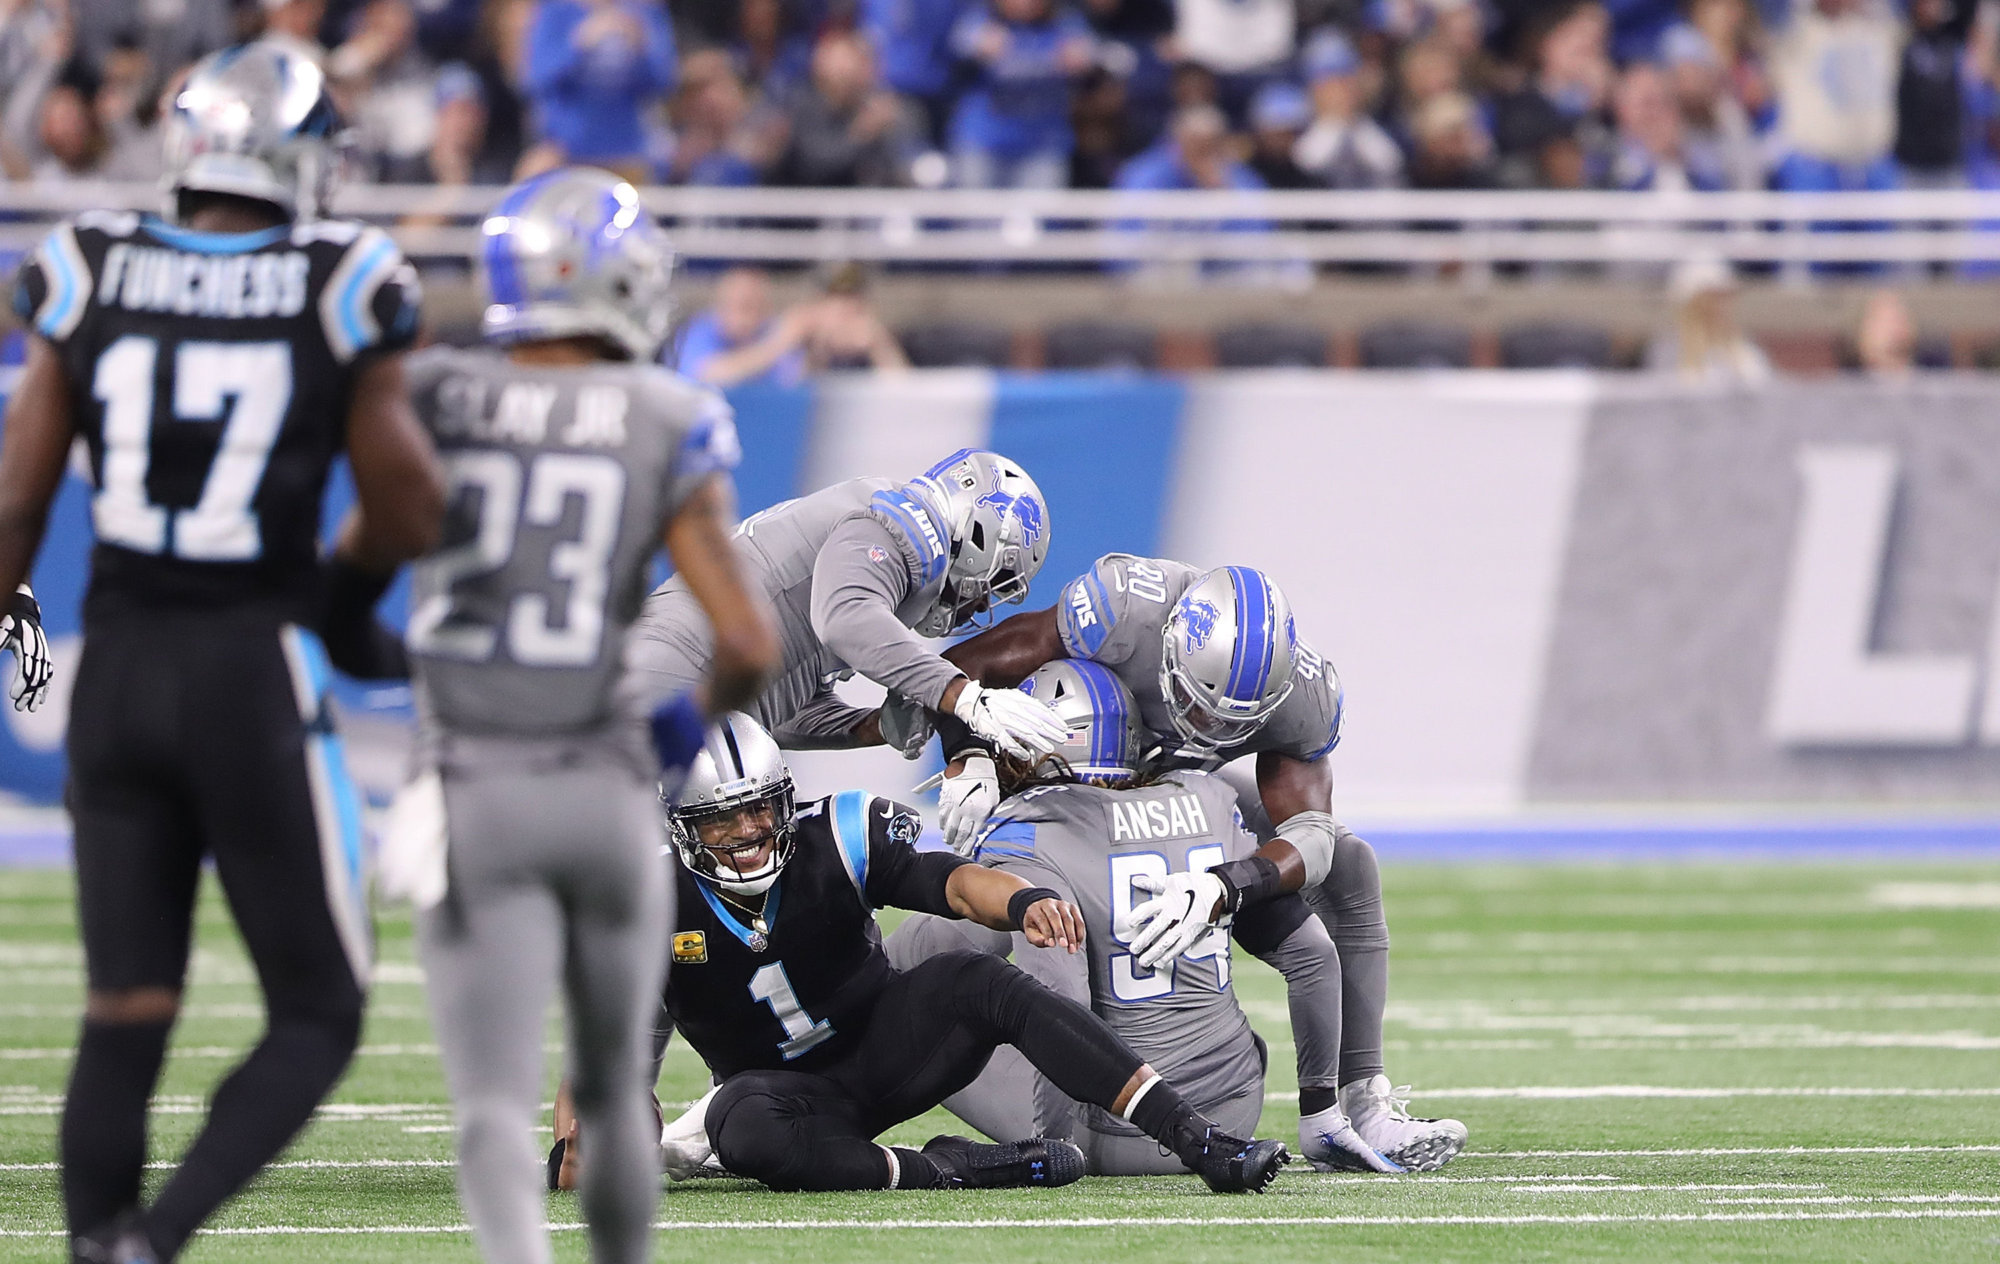 DETROIT, MI - NOVEMBER 18: Ezekiel Ansah #94 of the Detroit Lions celebrates a sack of Cam Newton #1 of the Carolina Panthers during the second quarter of the game at Ford Field on November 18, 2018 in Detroit, Michigan (Photo by Leon Halip/Getty Images)